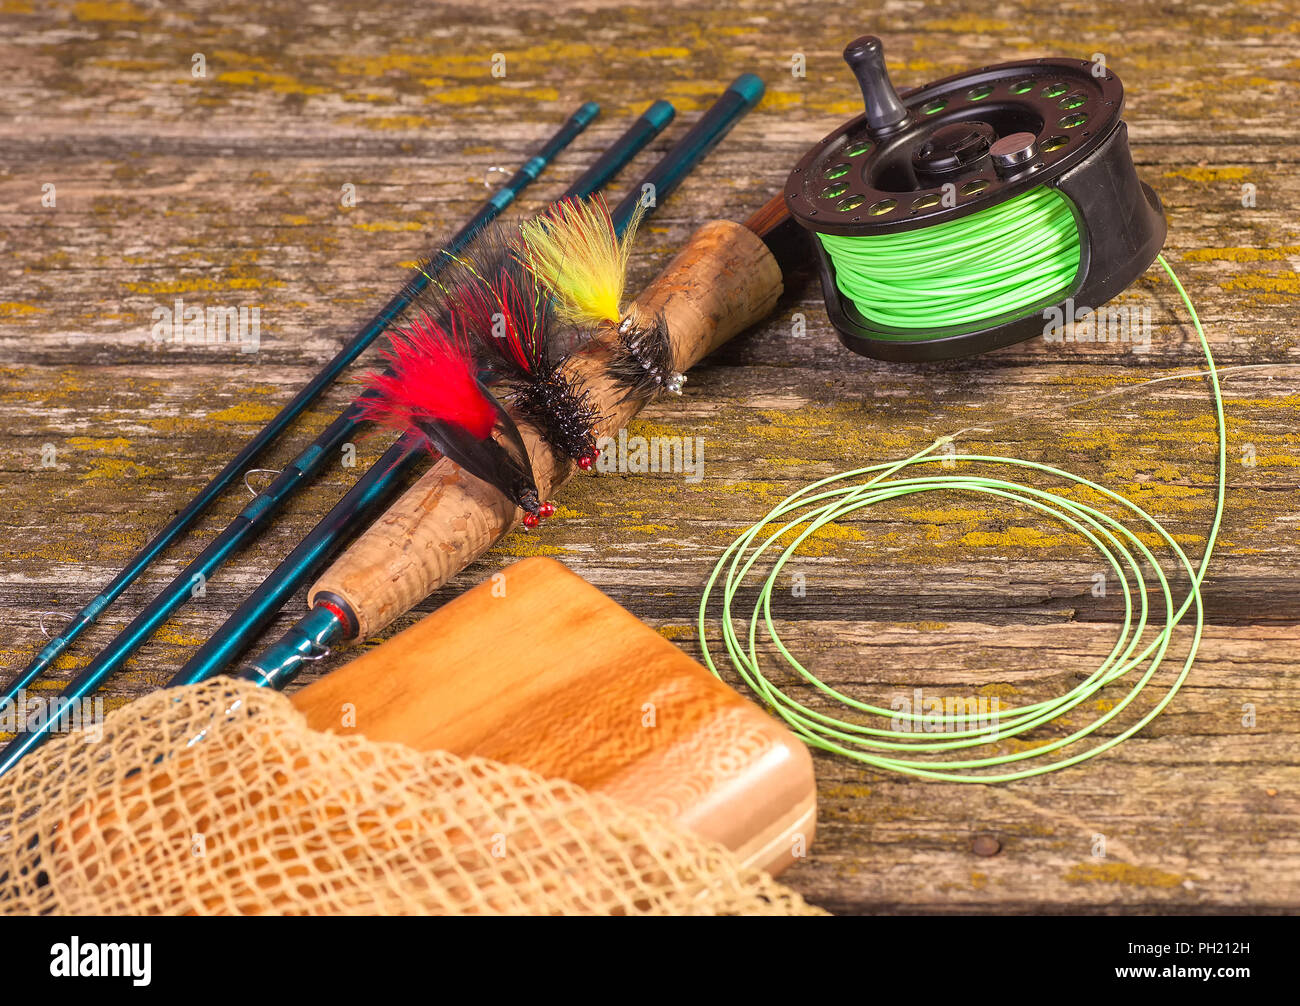 https://c8.alamy.com/comp/PH212H/fly-fishing-rod-with-a-coil-and-flies-lie-on-old-wooden-boards-PH212H.jpg